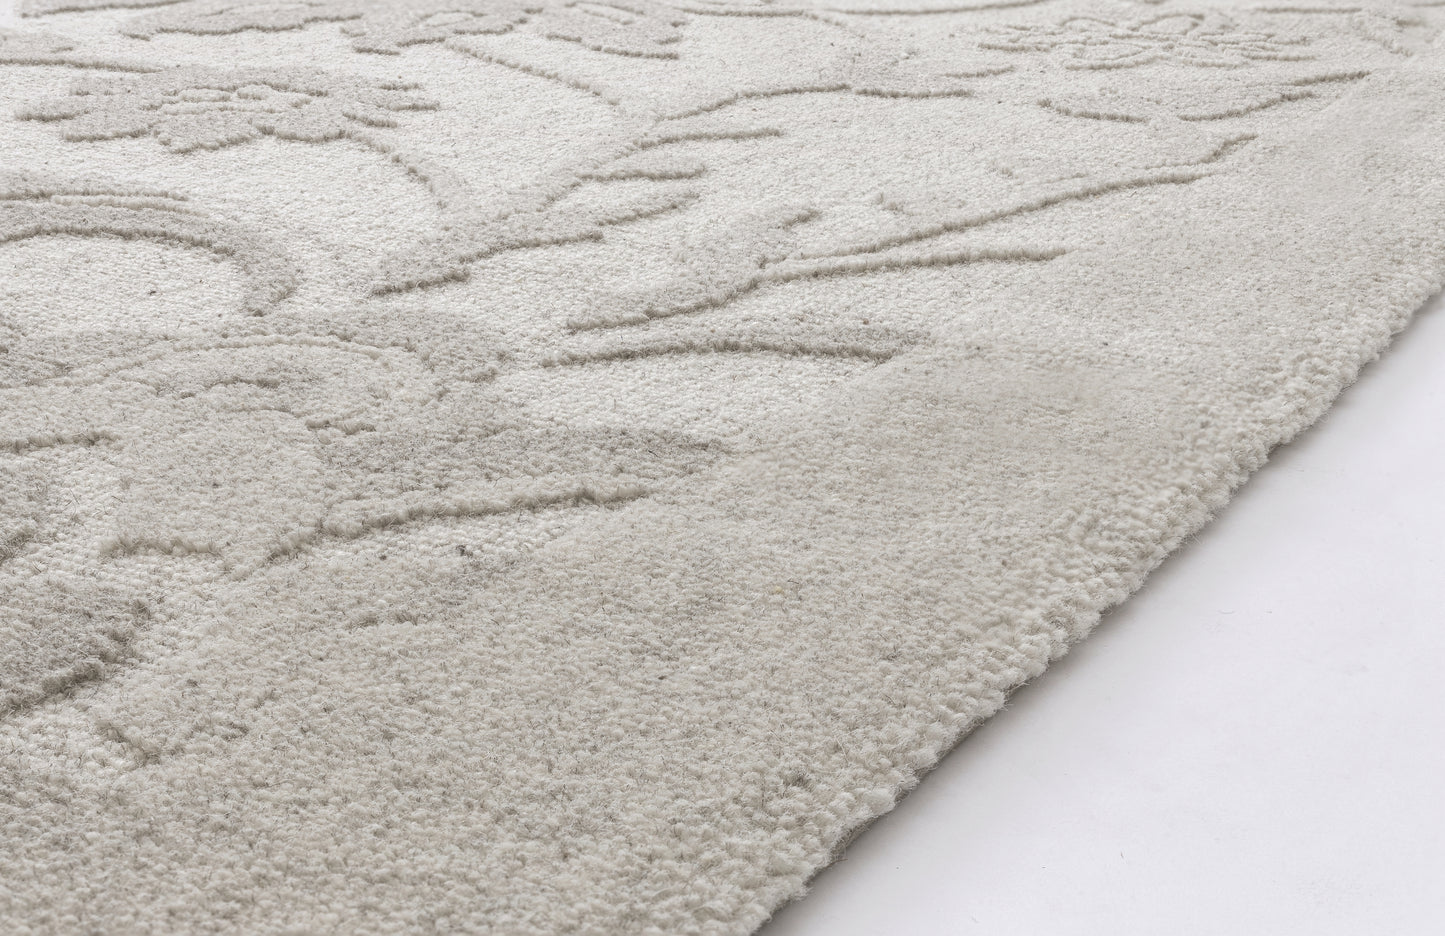 Agnella Rugs Noble MIREM Light Grey - 100% Undyed British Wool - Free Delivery